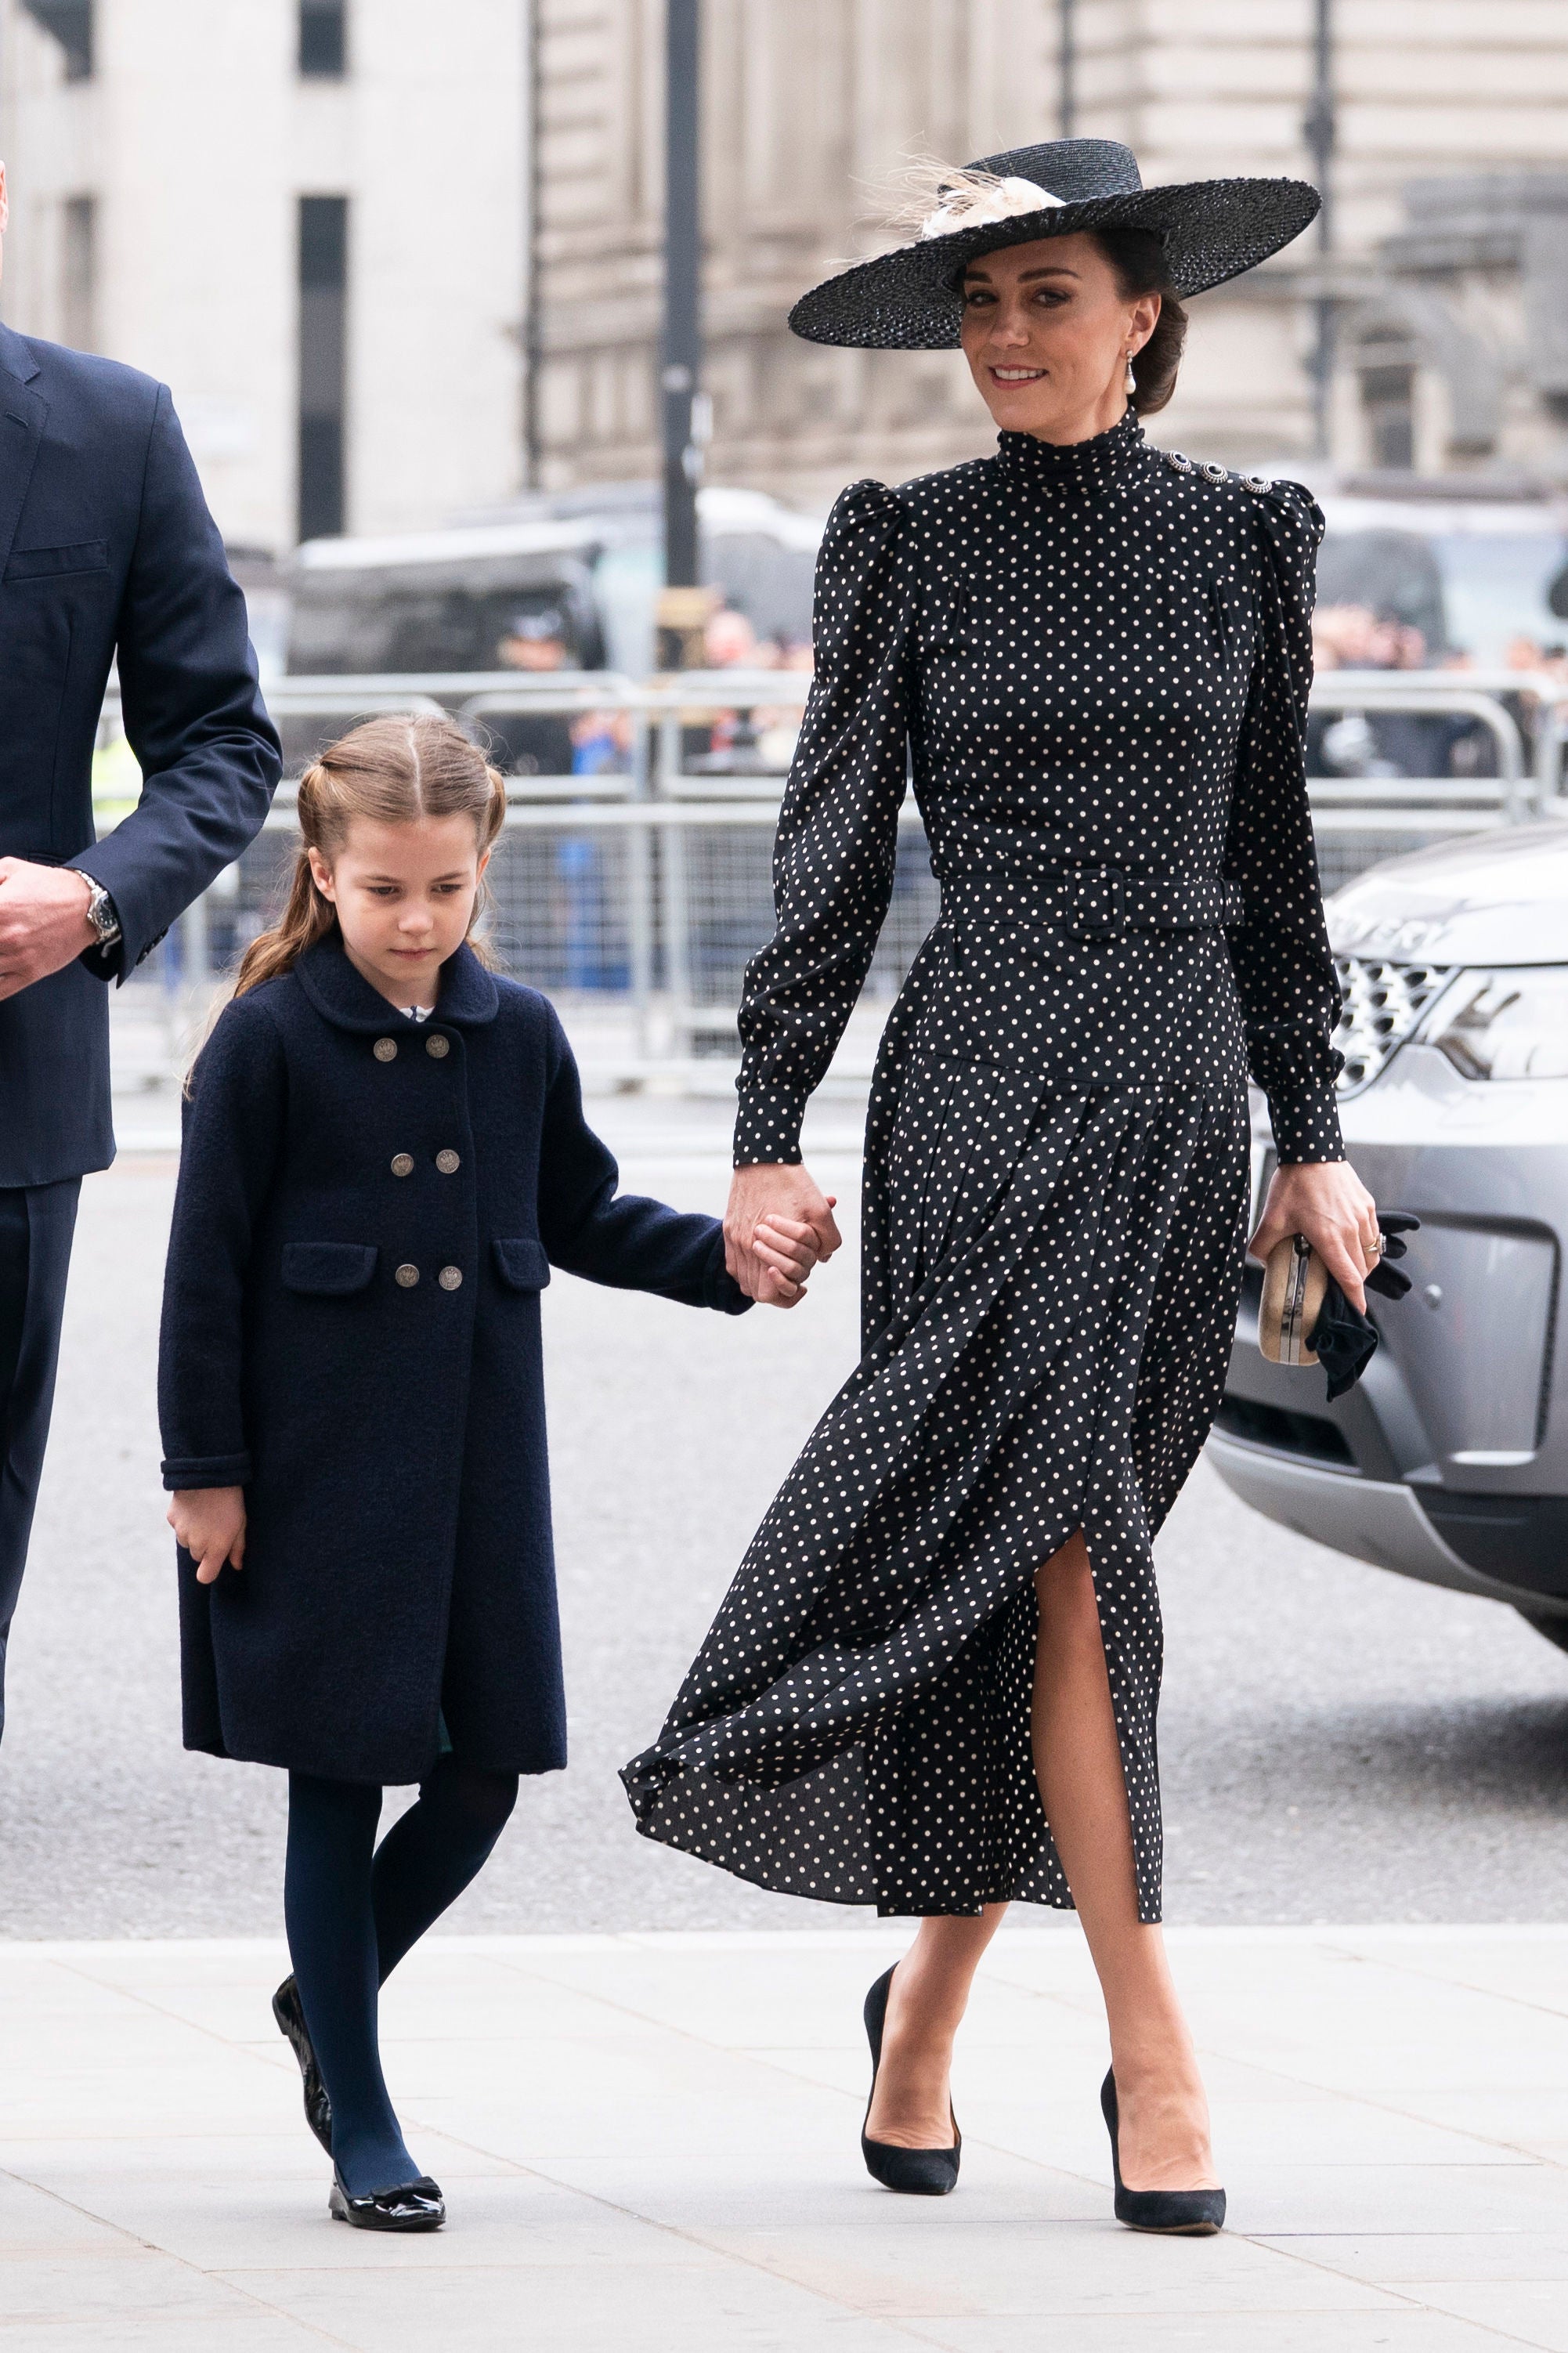 Kate pictured attending the service with her daughter, Princess Charlotte